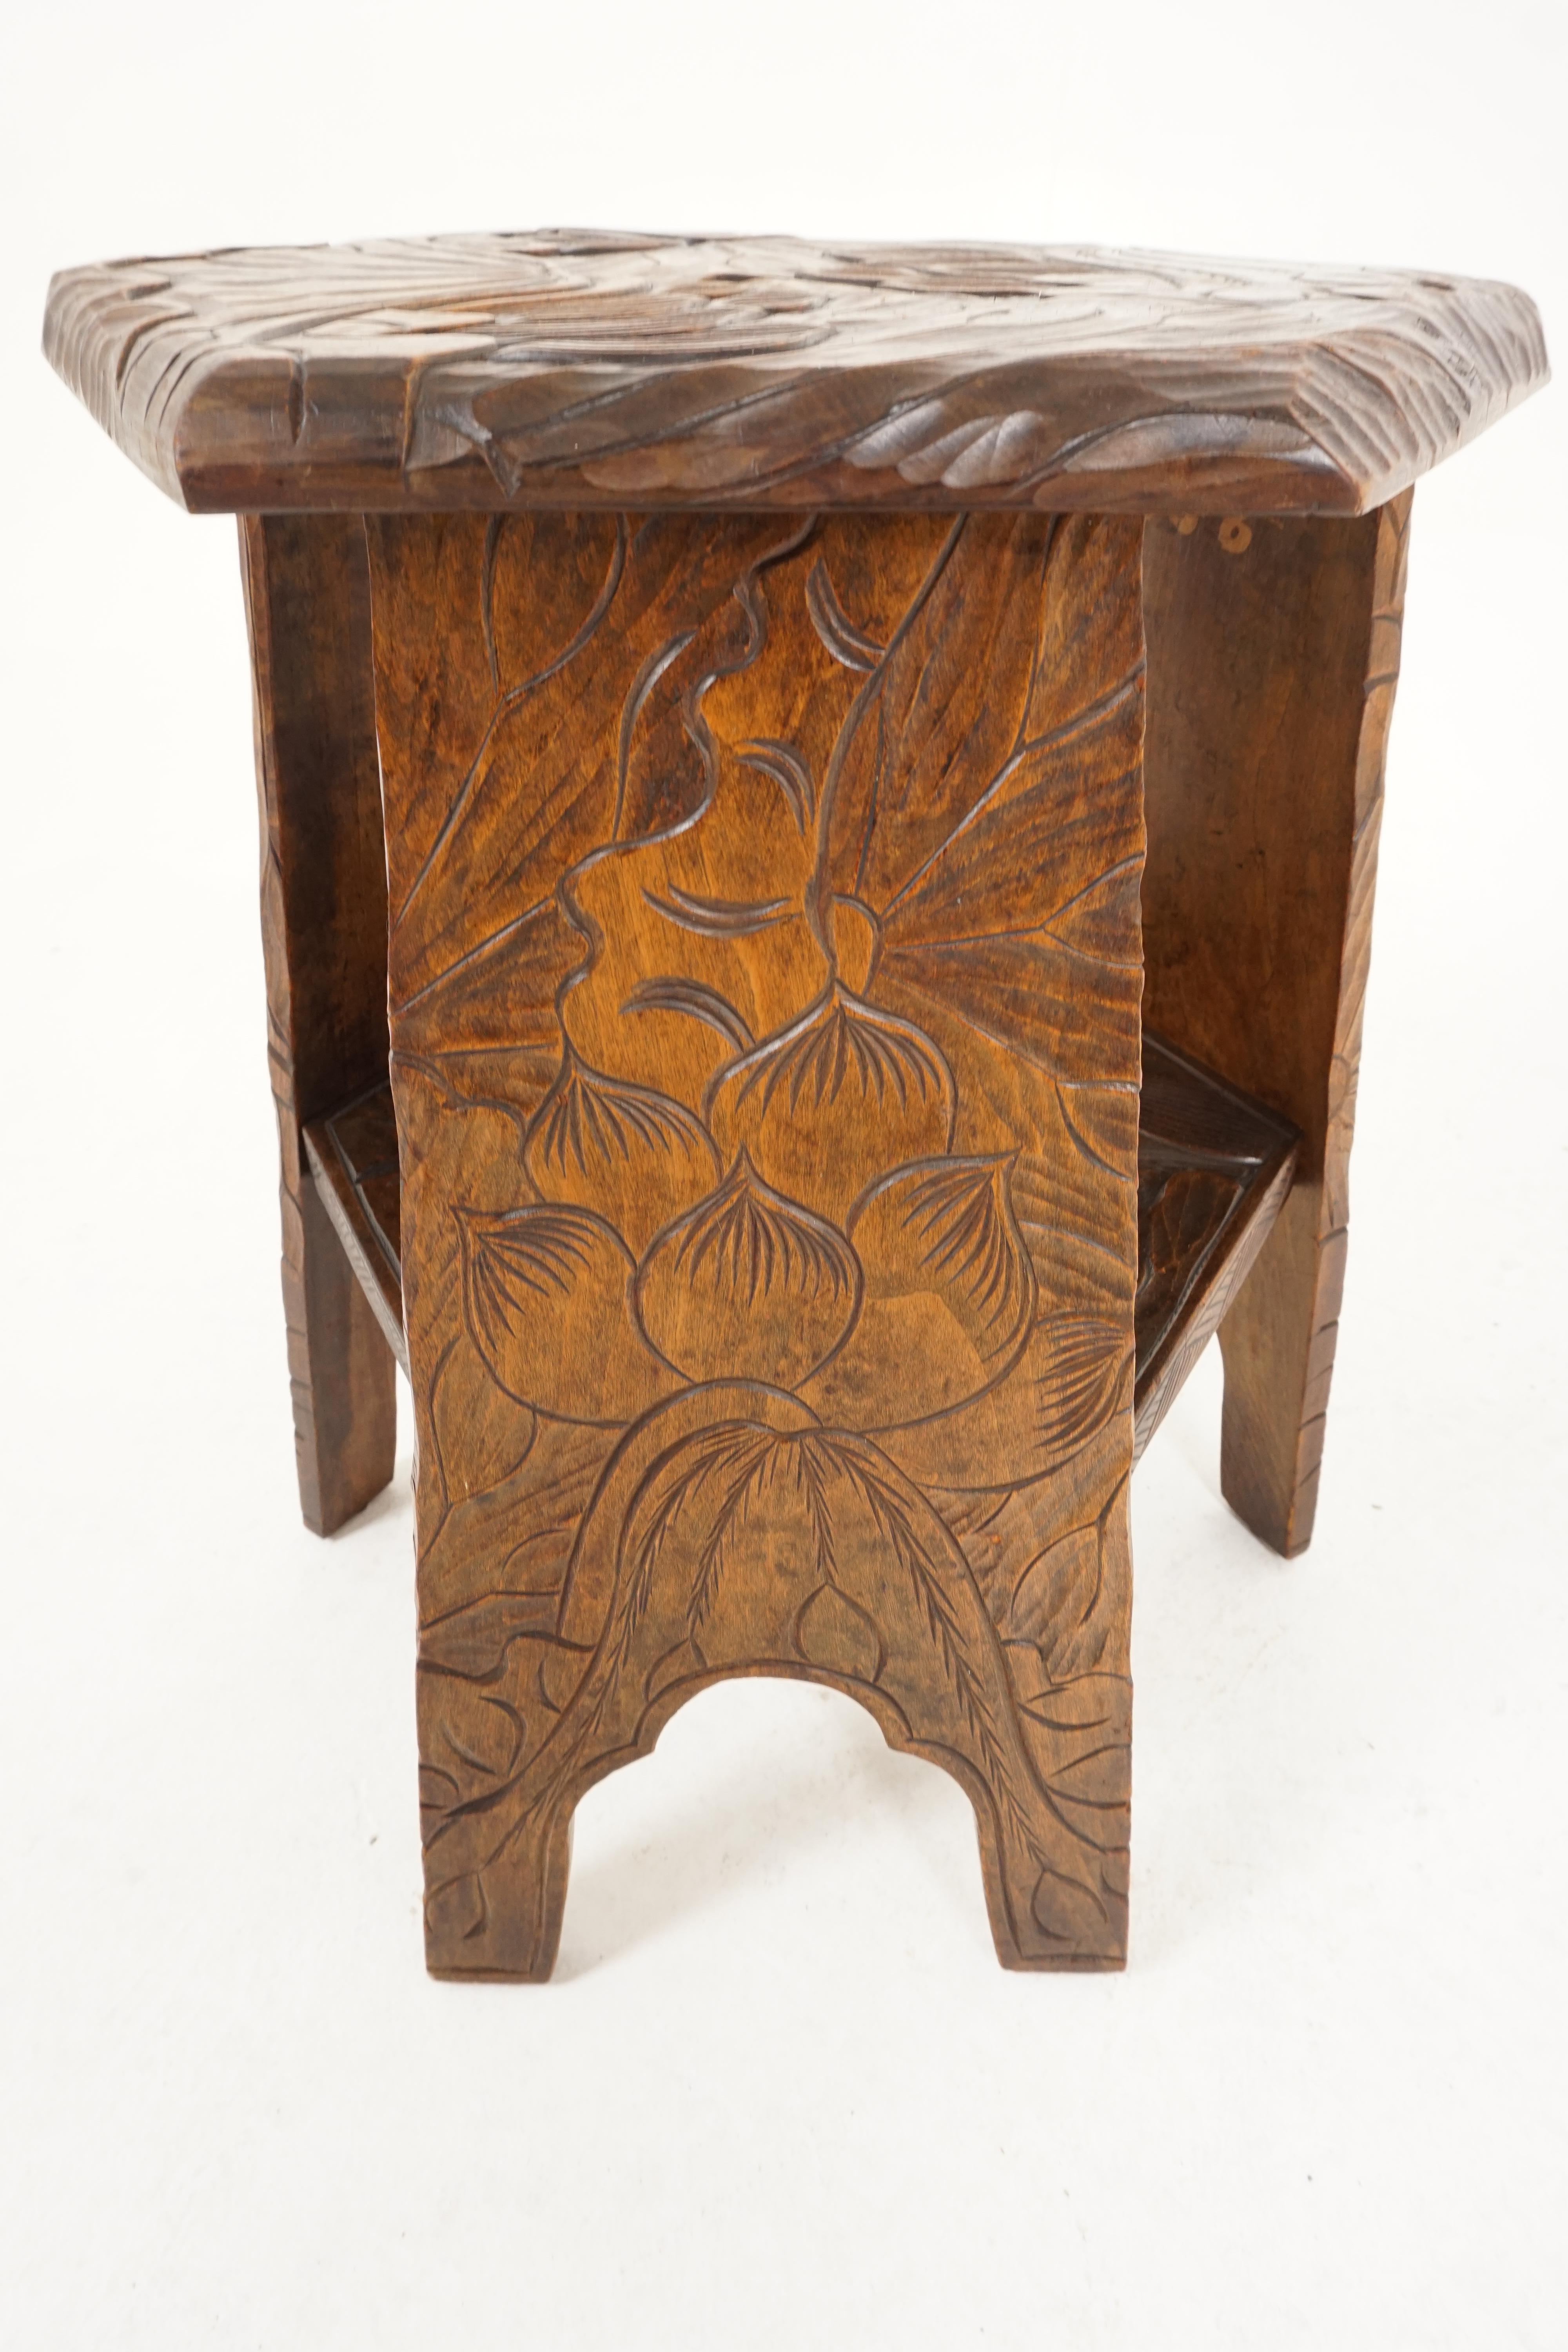 Antique carved octagonal plant stand, side table, Liberty's London, Japan 1905, B2207

Japan 1905
Solid walnut
Floral carved top
Four wide carved legs
Connected by a carved shelf below
All joints are tight
Lovely quality and in good